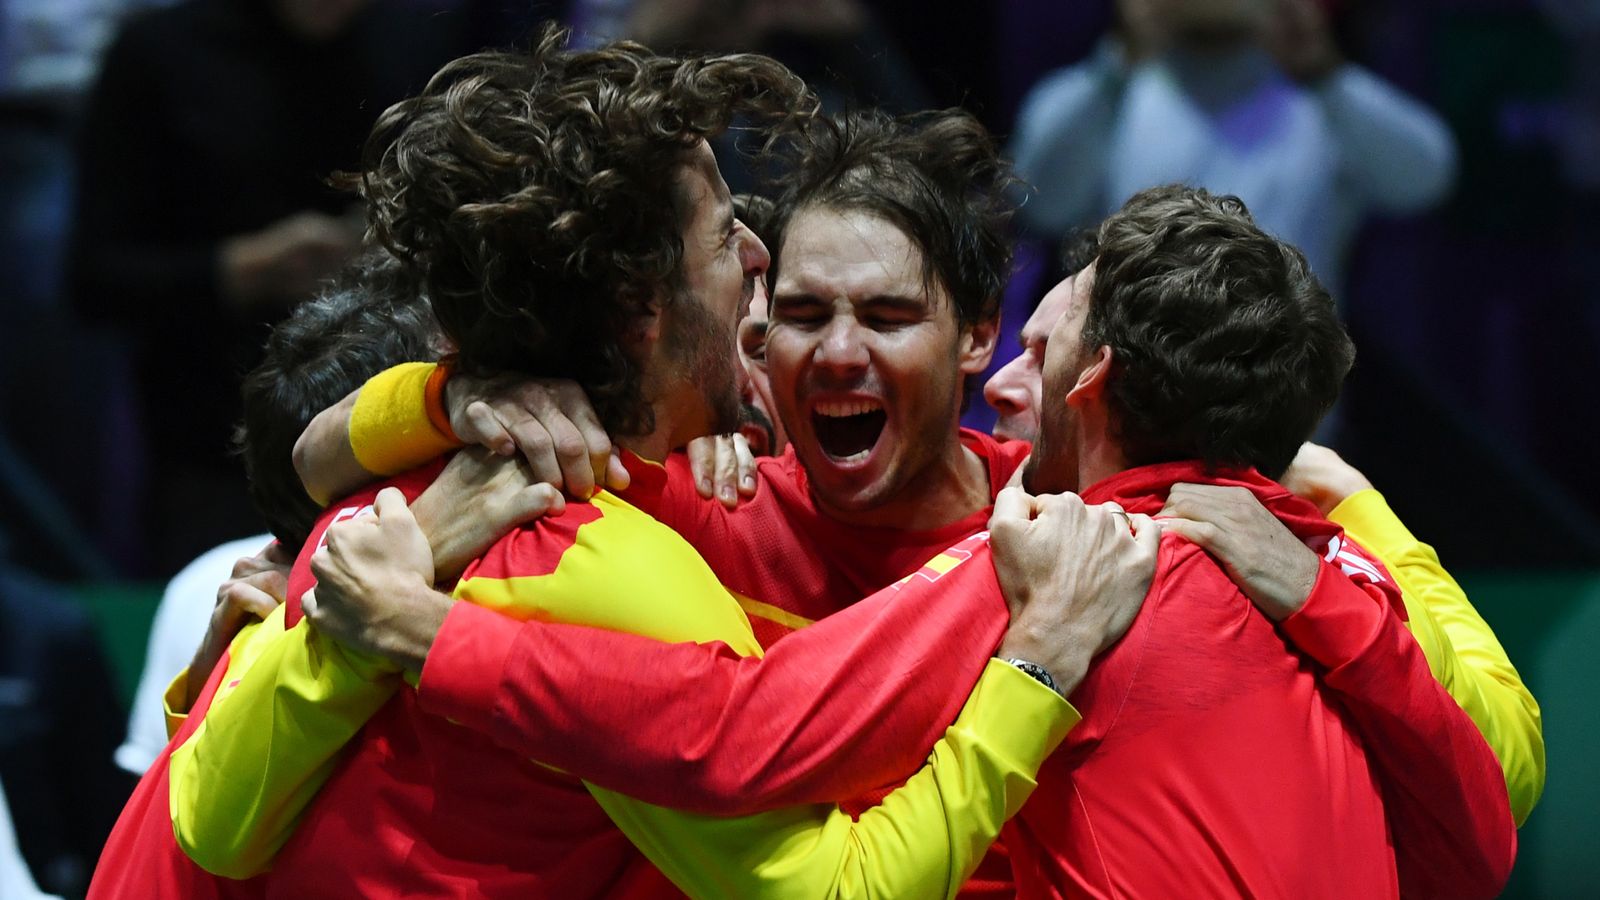 Spain clinch sixth Davis Cup title with victory over Canada on home